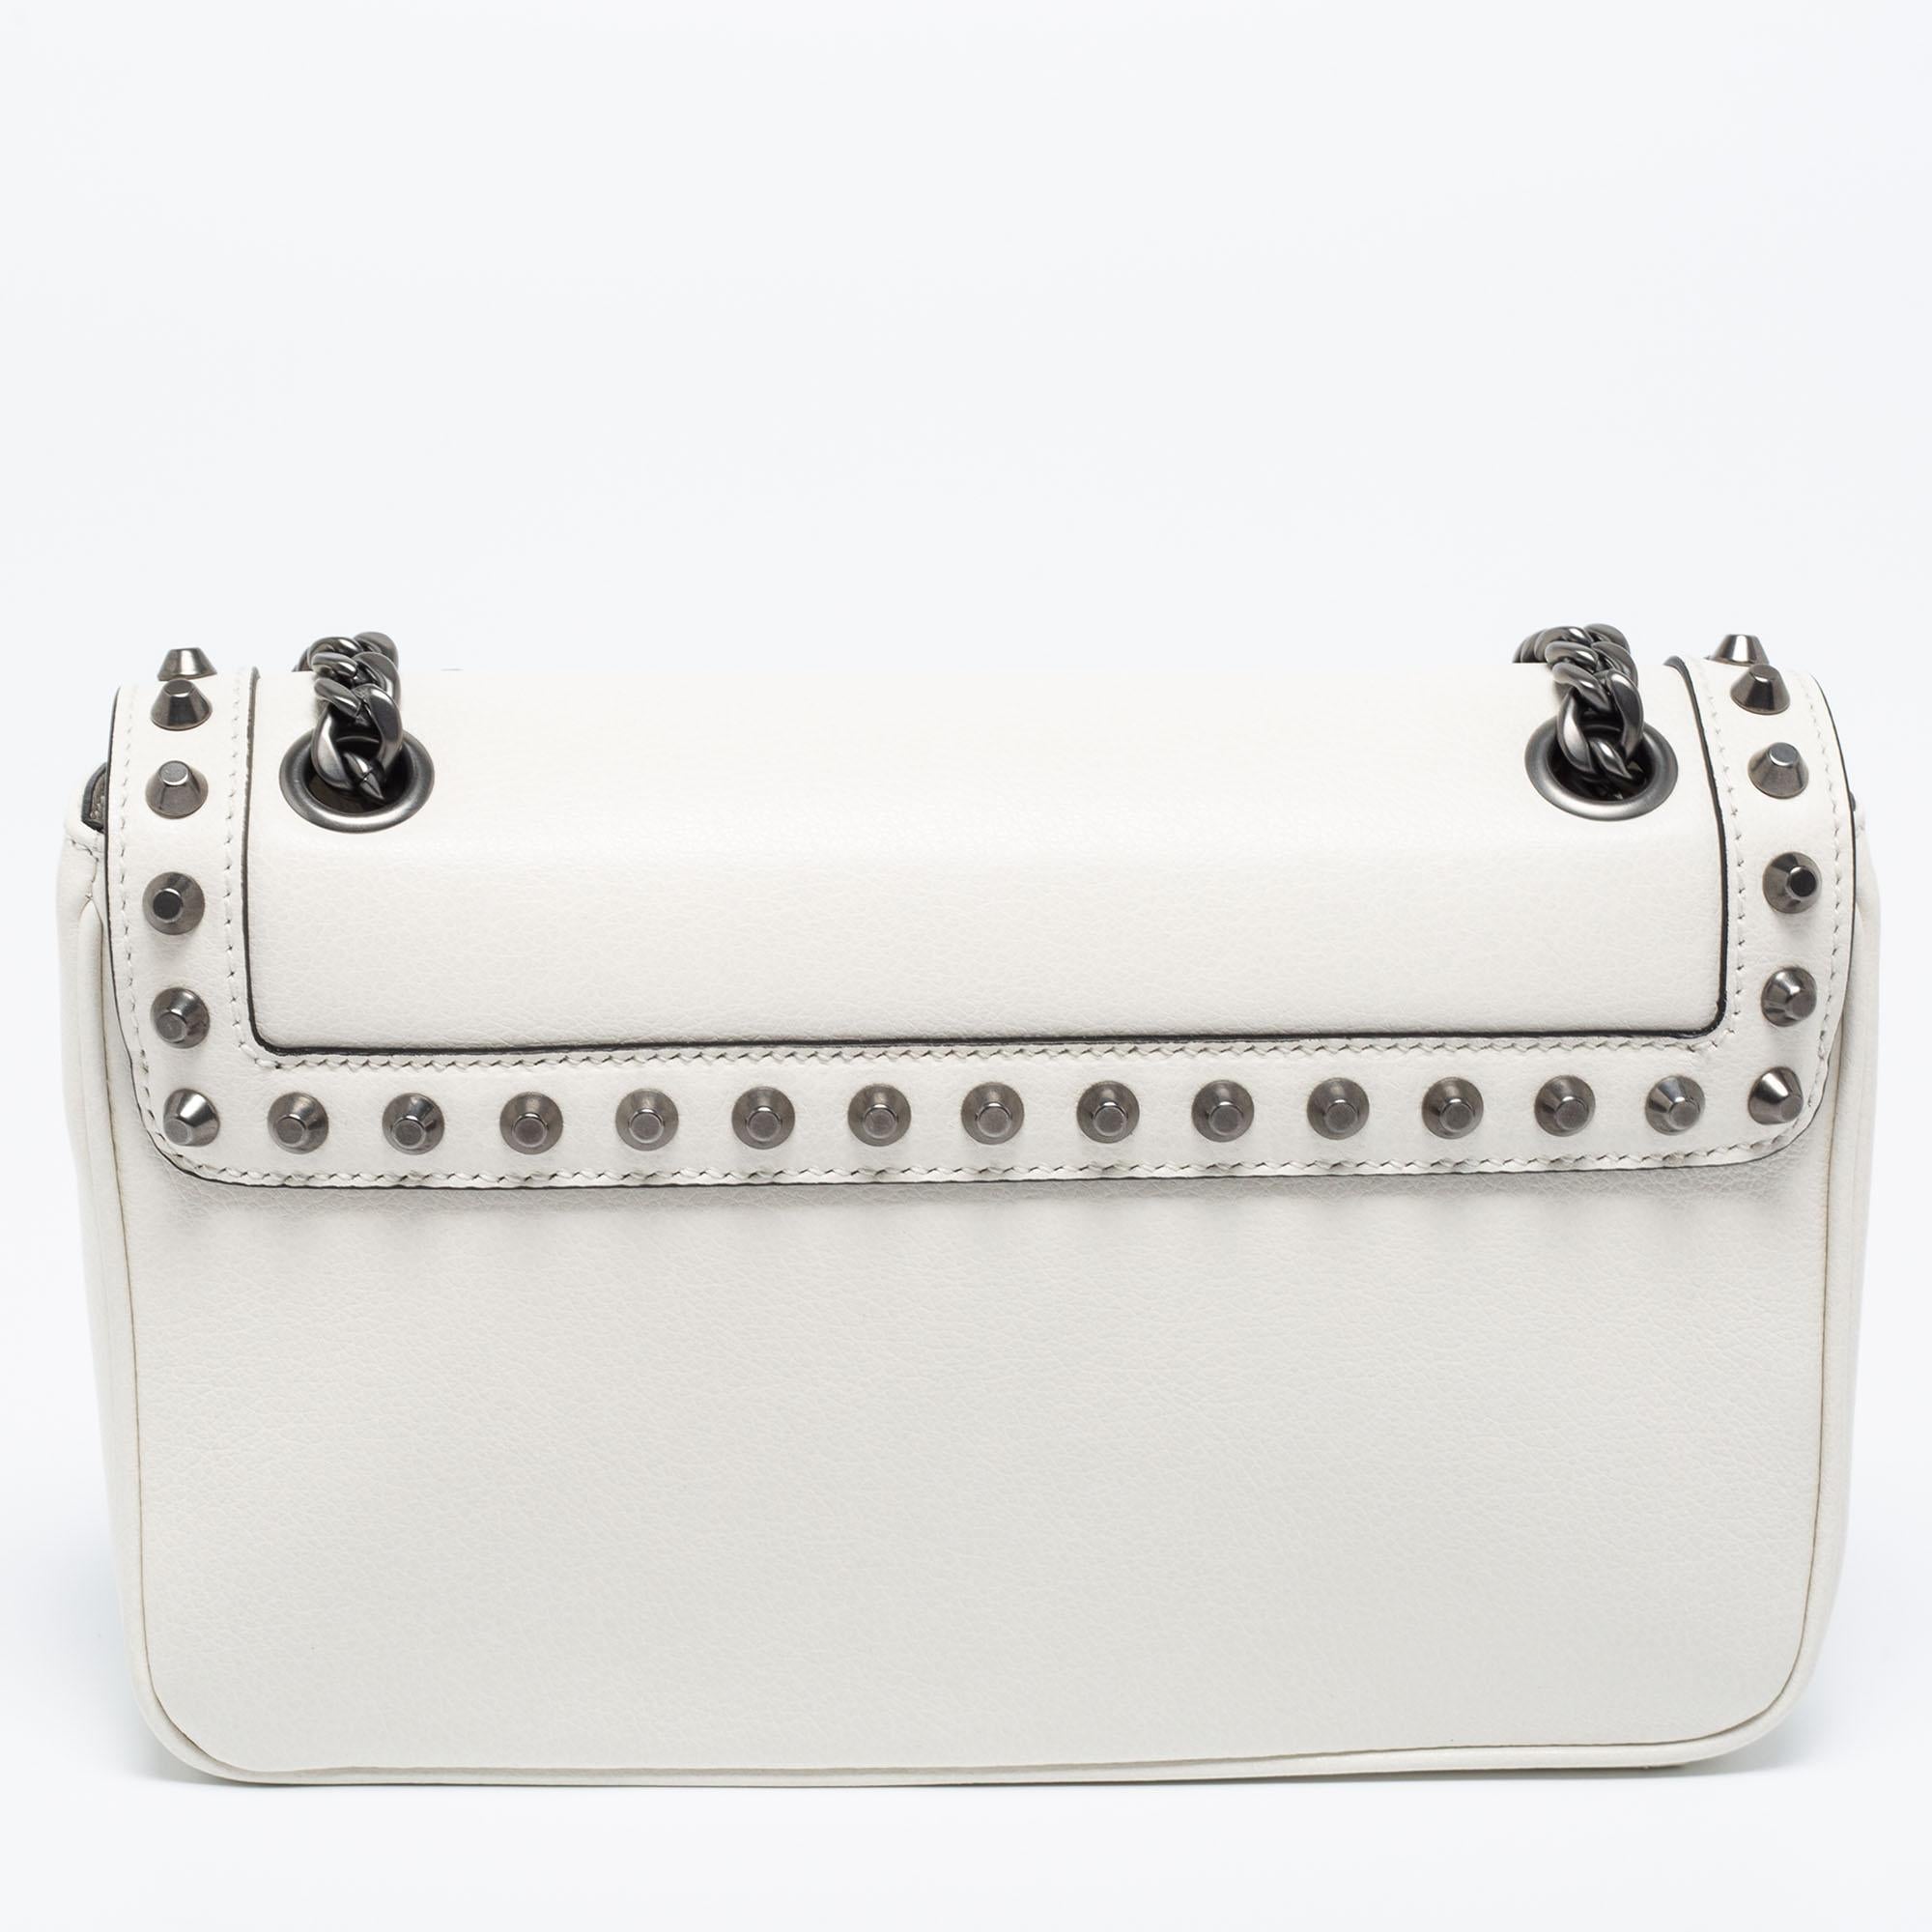 Experience fine craftsmanship with this immaculately-designed bag by Prada. It is crafted using off-white leather, which is highlighted with studded embellishments. It features a 55 cm shoulder strap, gunmetal-tone hardware, and a neat nylon-lined